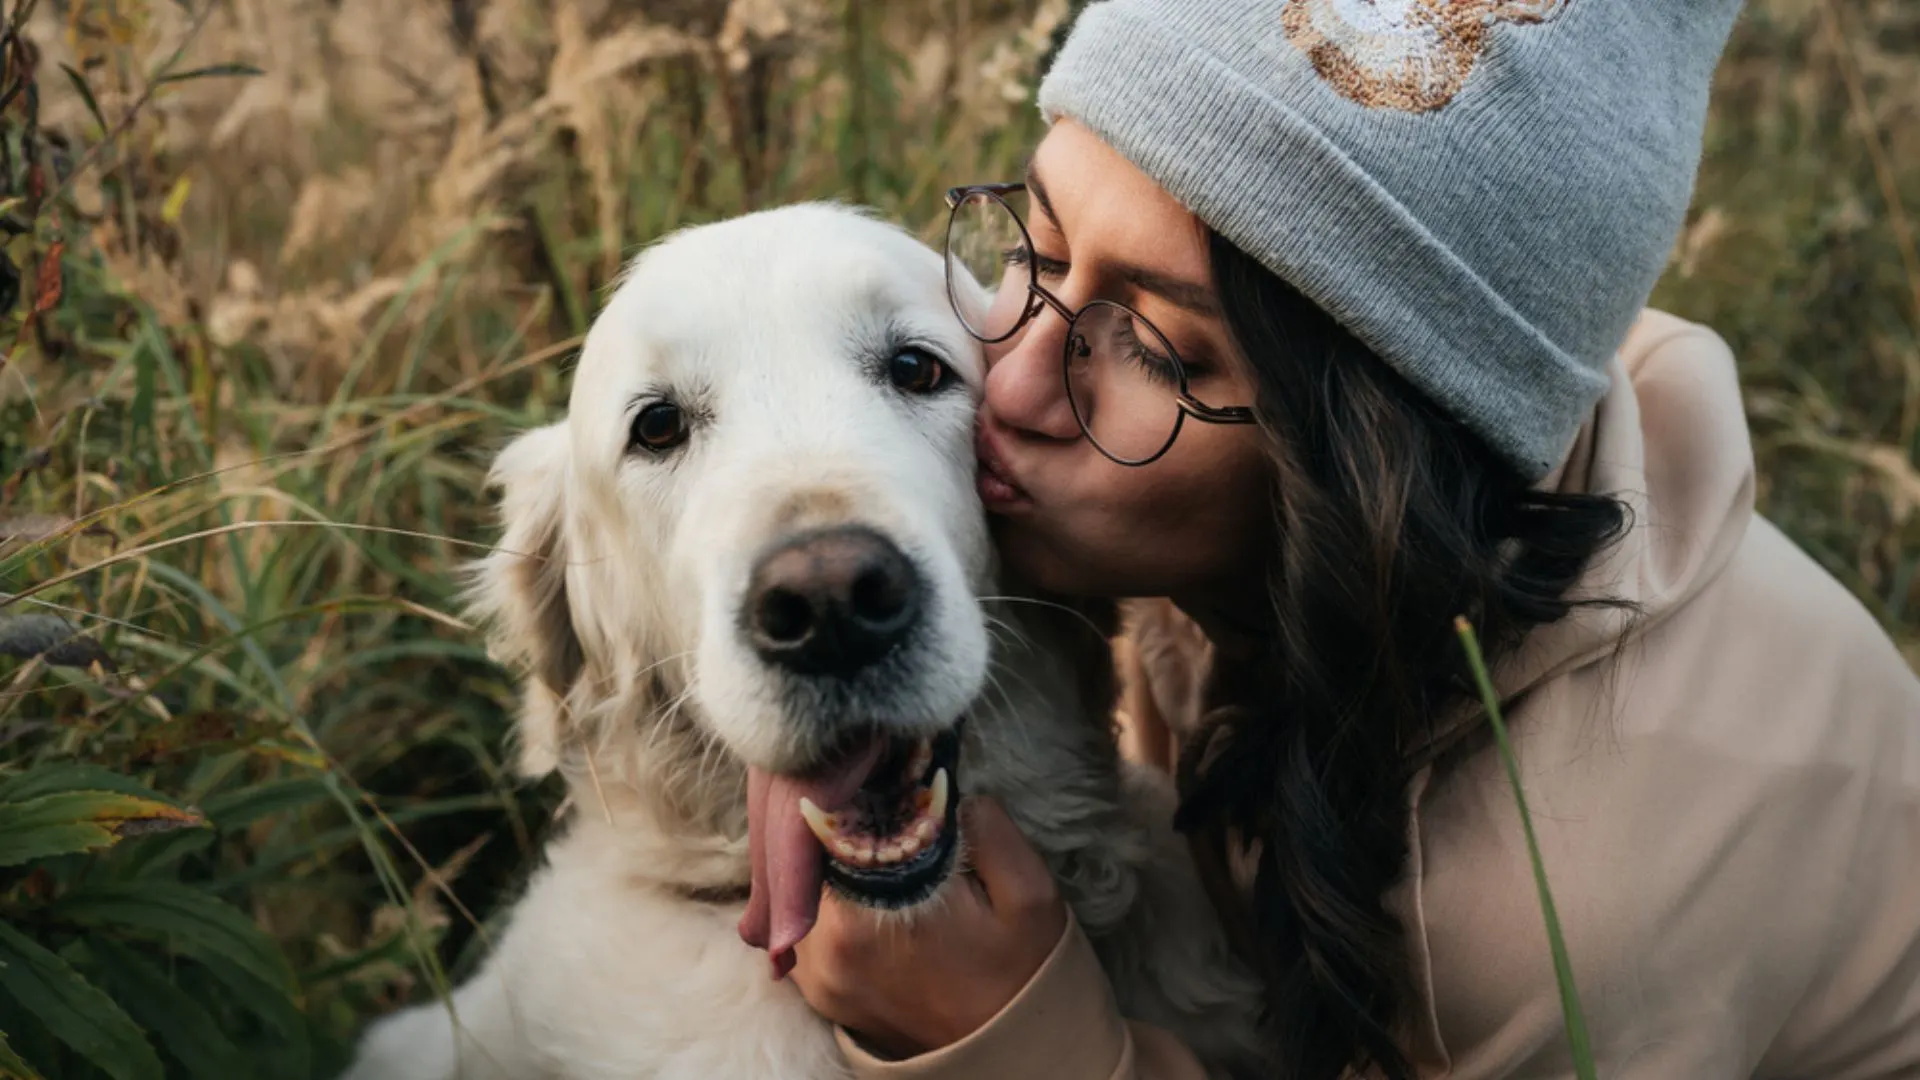 woman kissing her dog